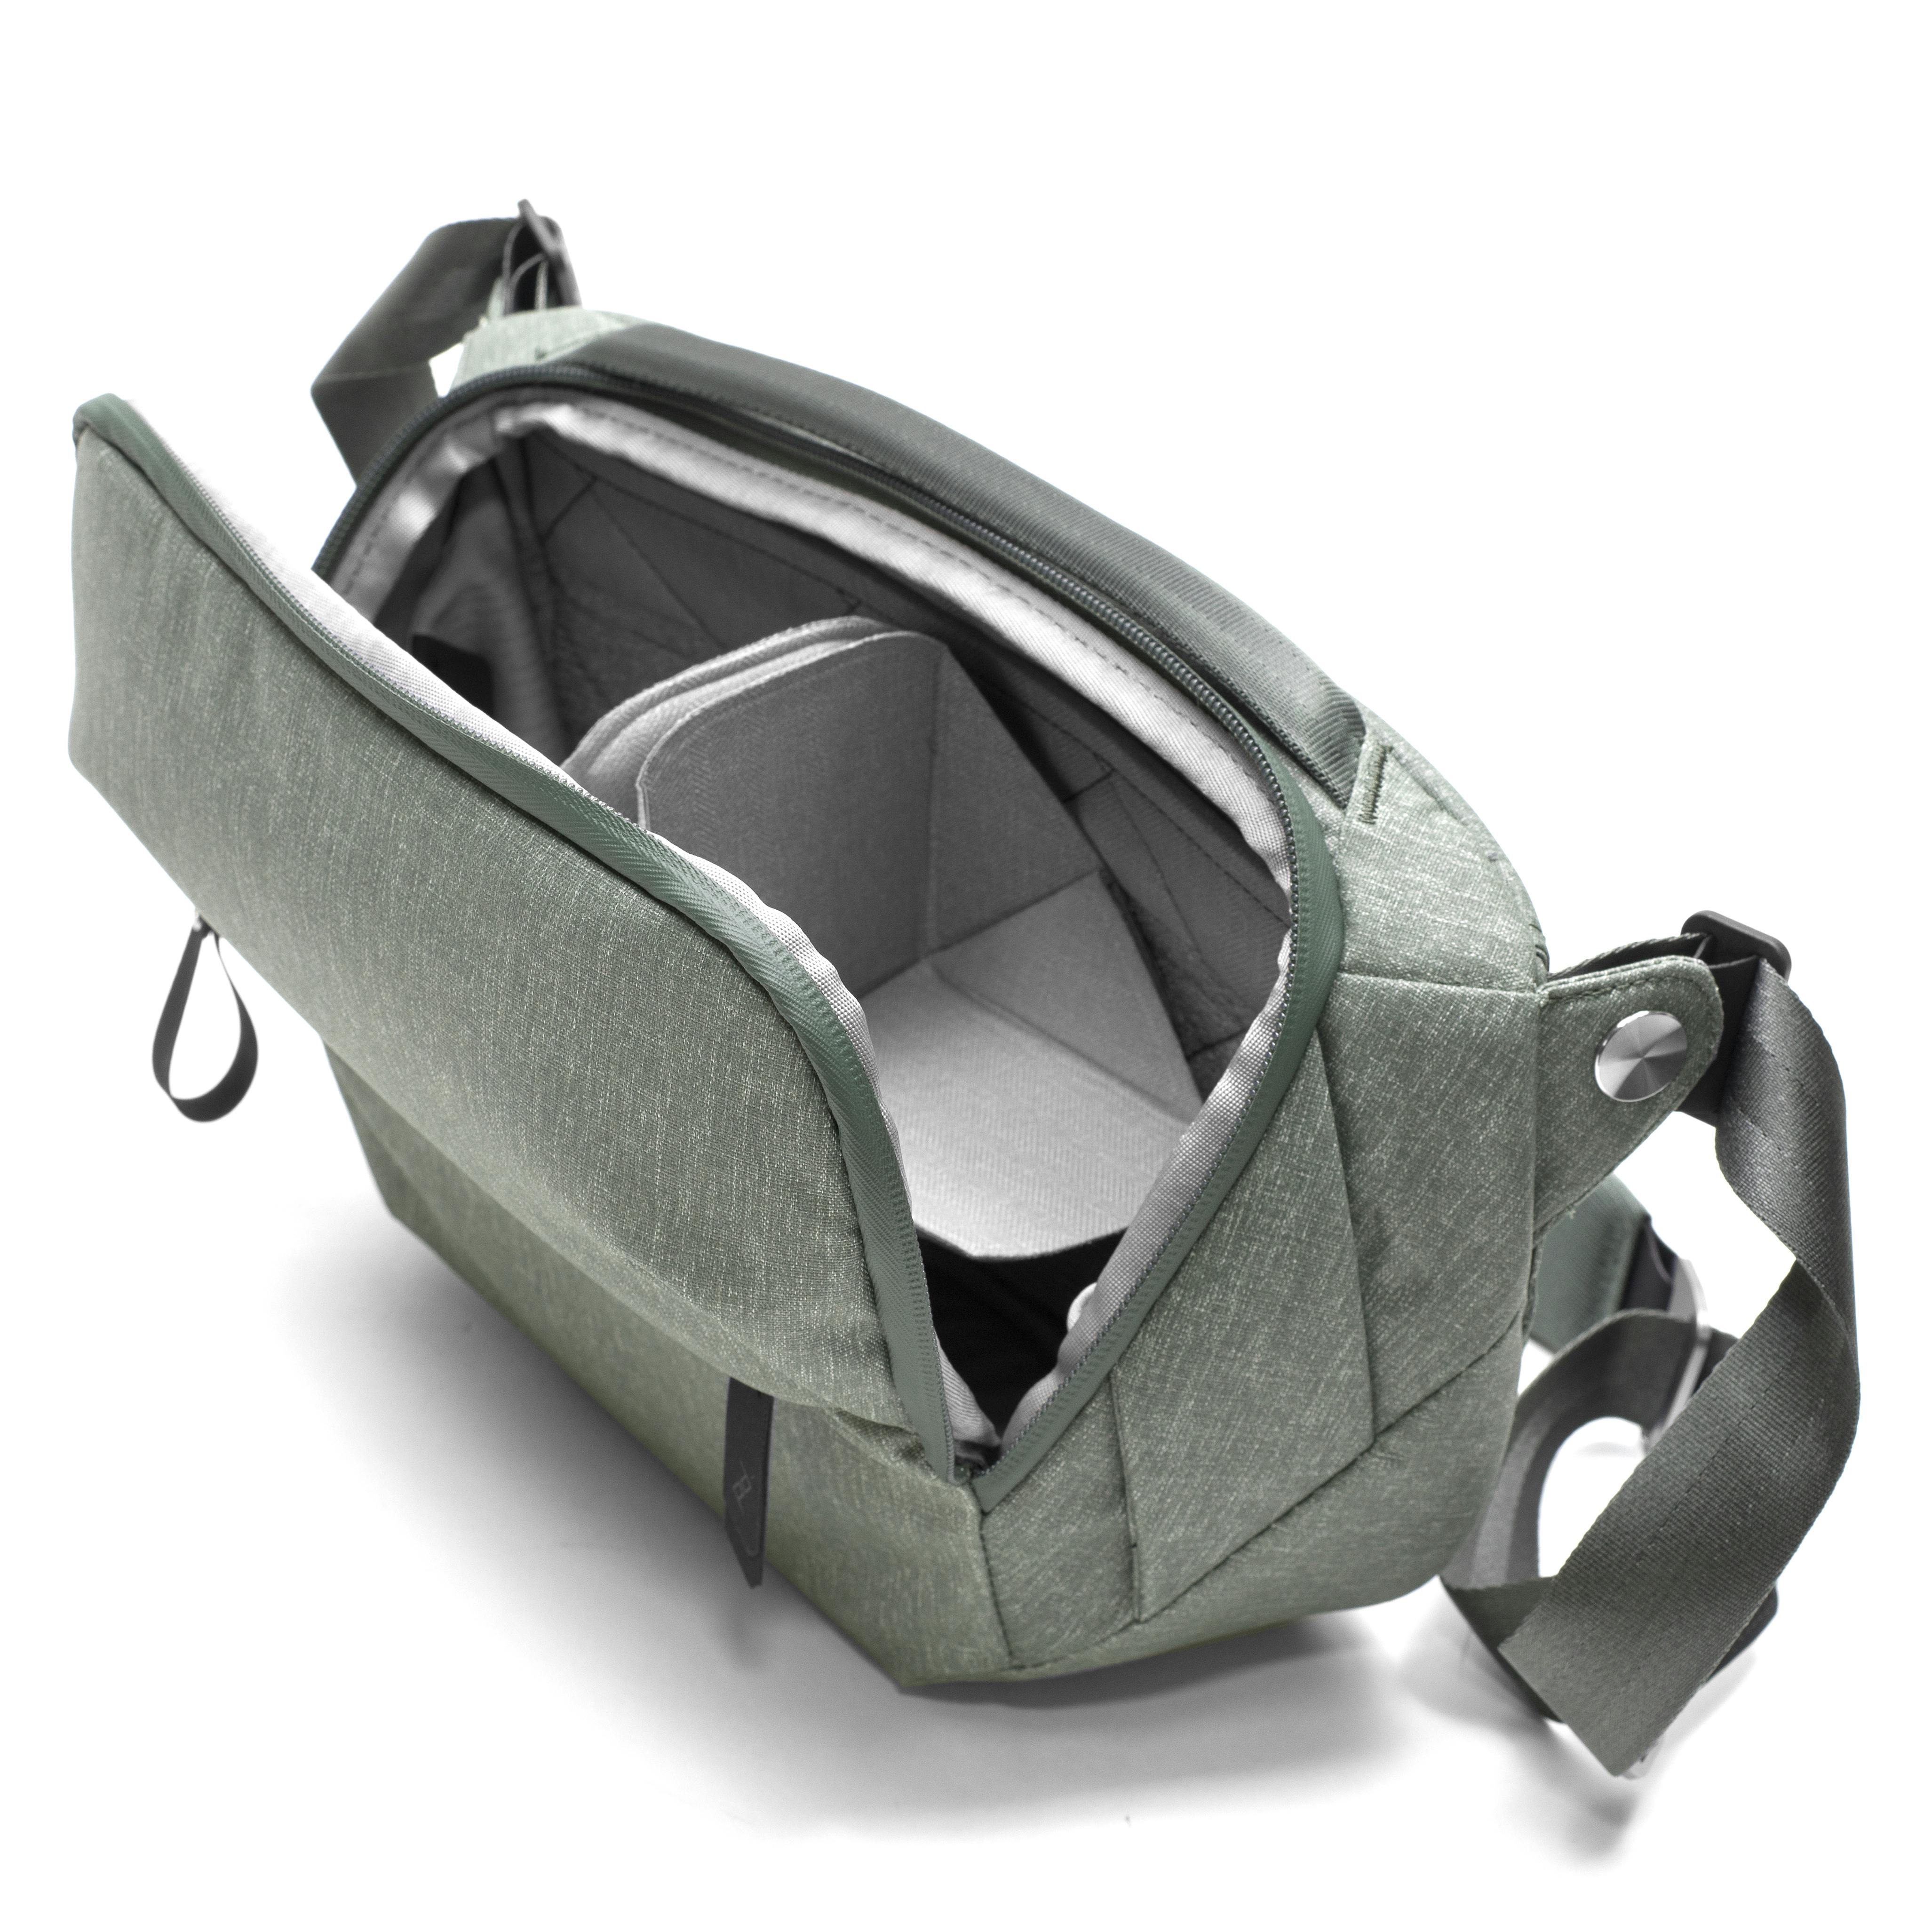 New w/o Tags! Peak Design The Everyday Sling 5L Sage Gray Green Bag